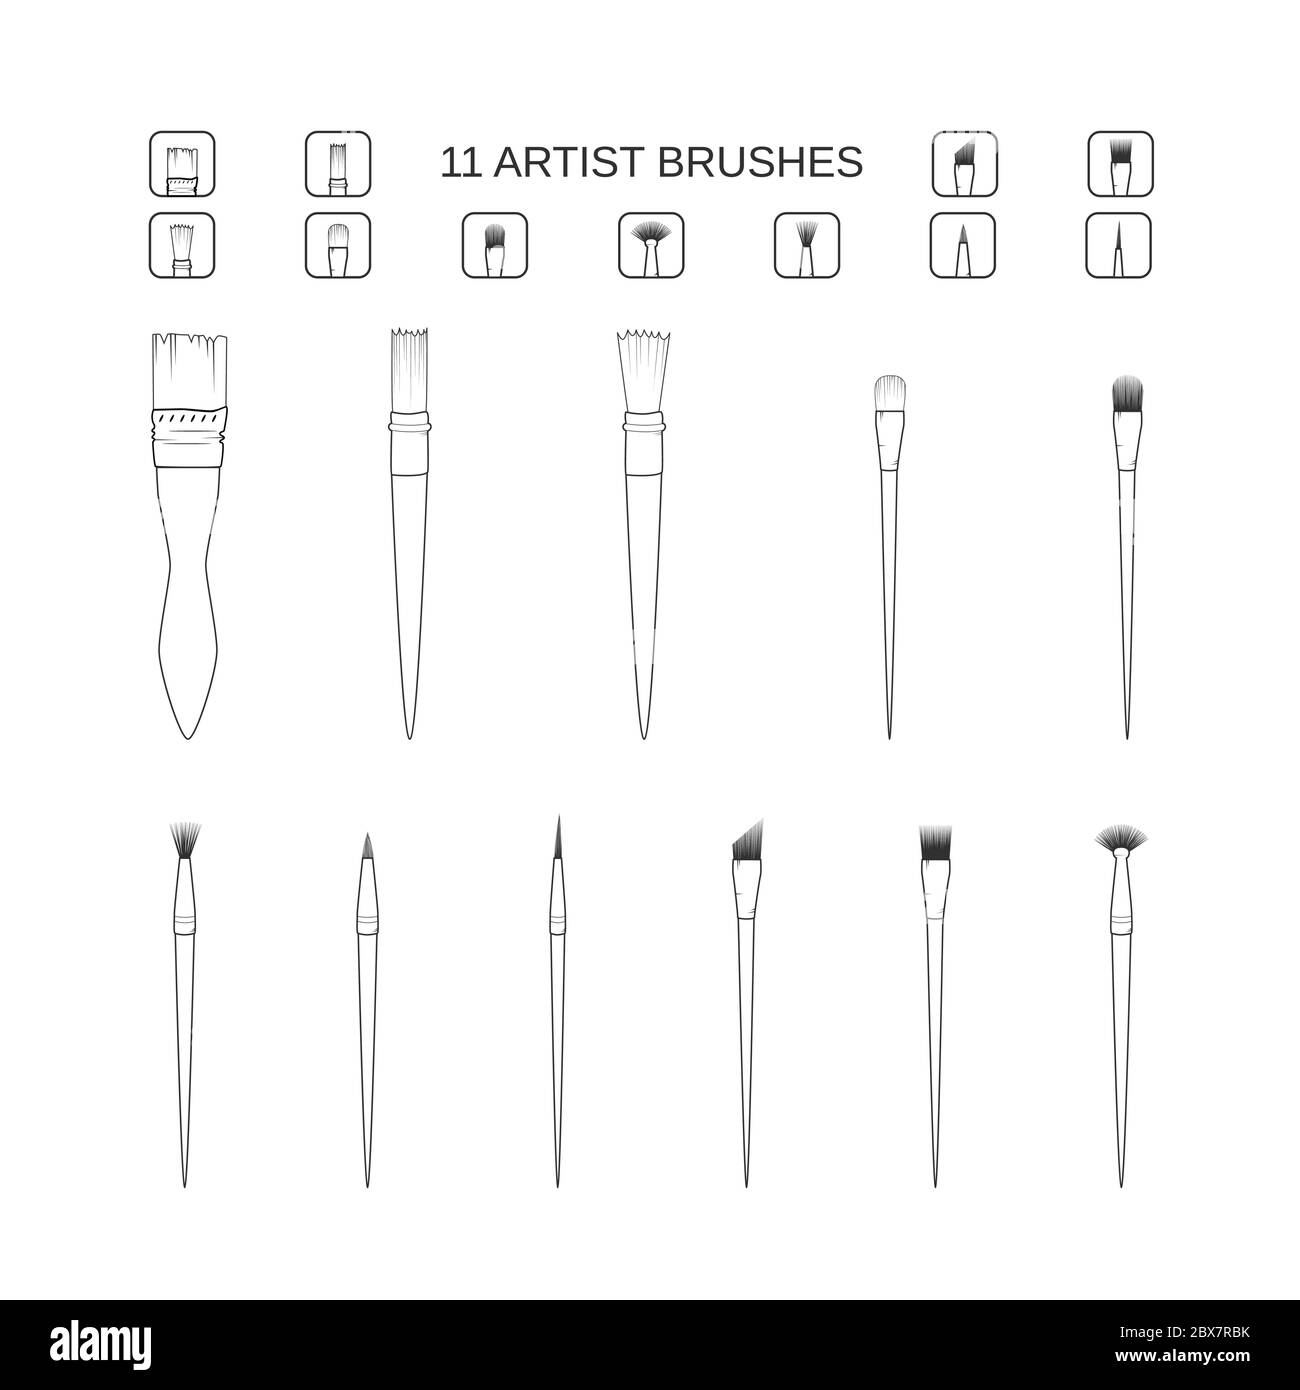 Premium Vector  Paint brushes for drawing, painting. paintbrushes of round  thin bristle type. artists tool, stationery. flat vector illustration  isolated on white background.